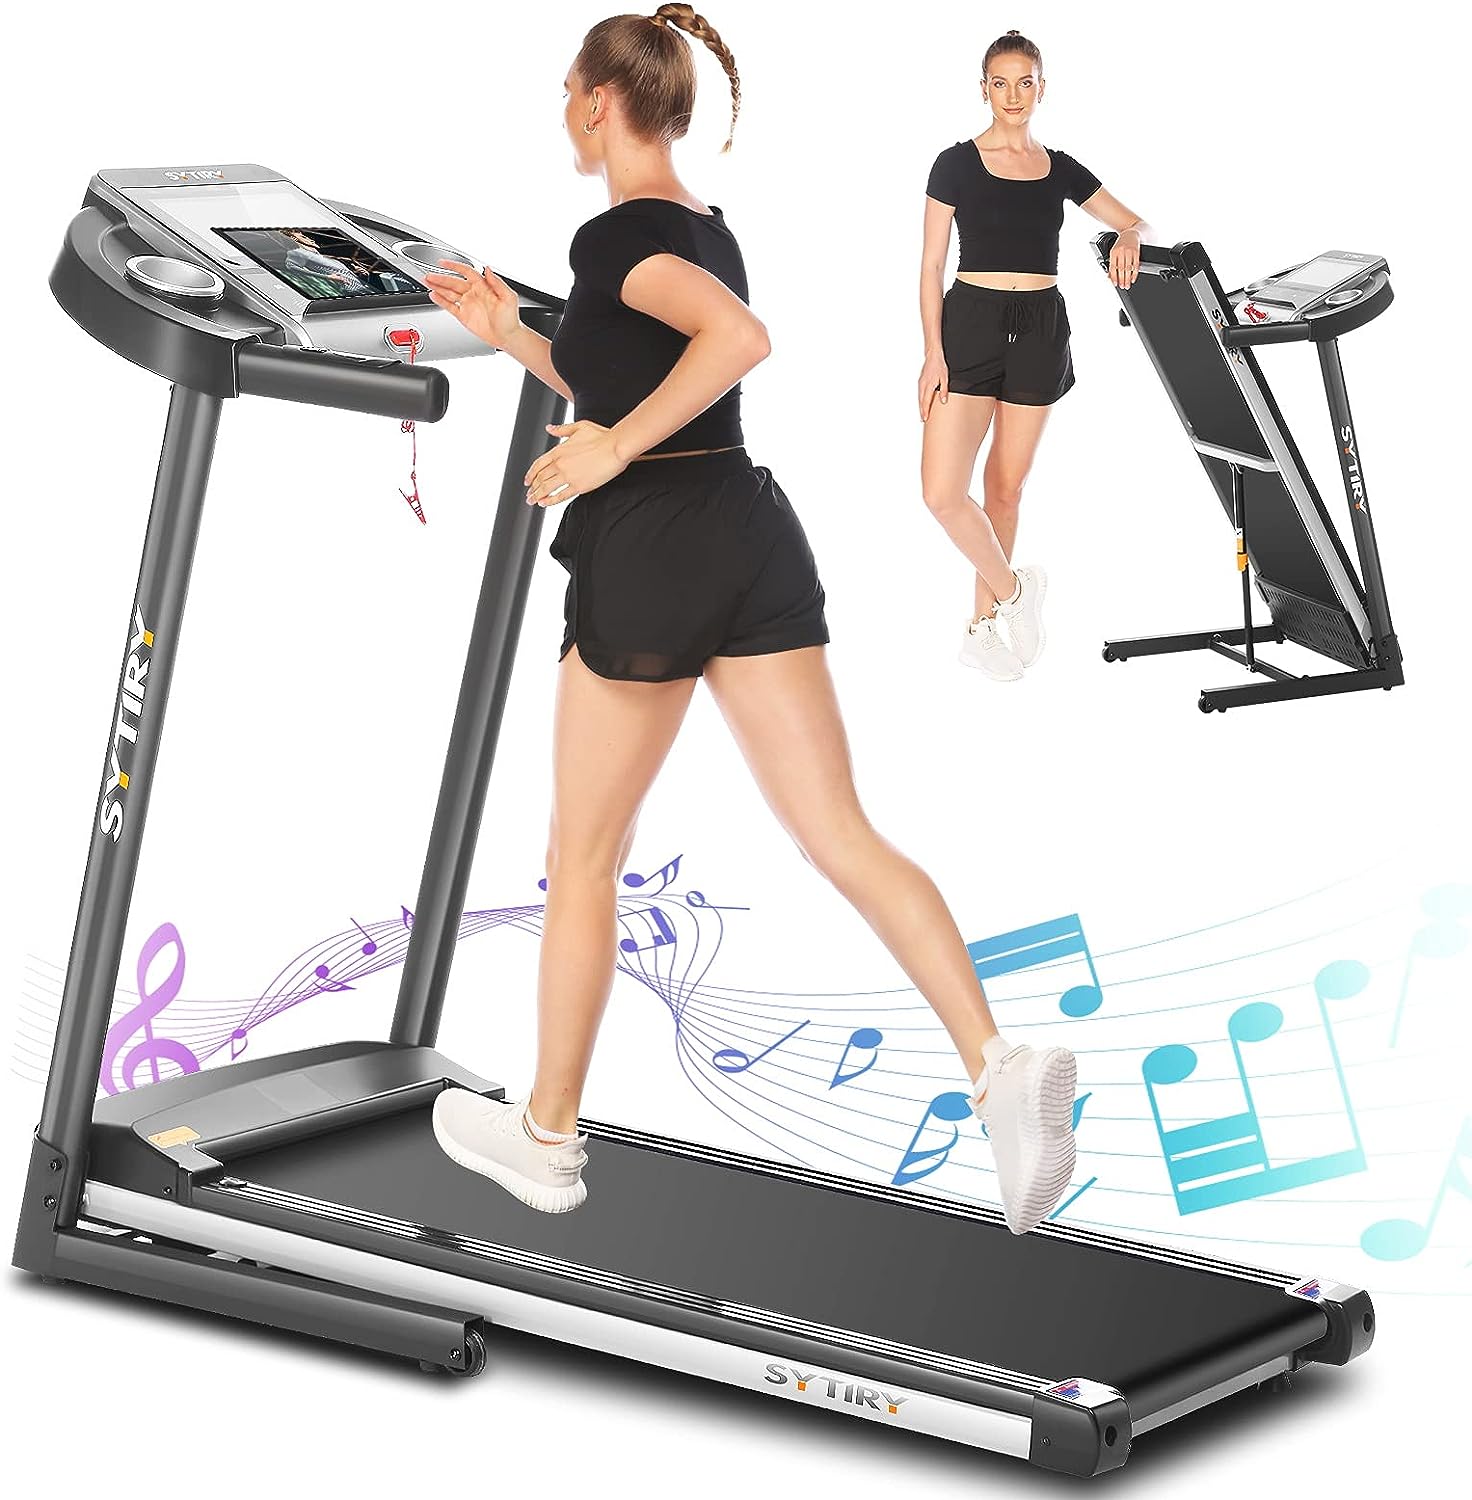 Smart Treadmills for Home, 10 HD Touchscreen Electric Treadmill with WiFi Connection, YouTube, Facebook, 3.25hp Folding Treadmill, Cardio Fitness Exercise Machine for Walking Jogging Running